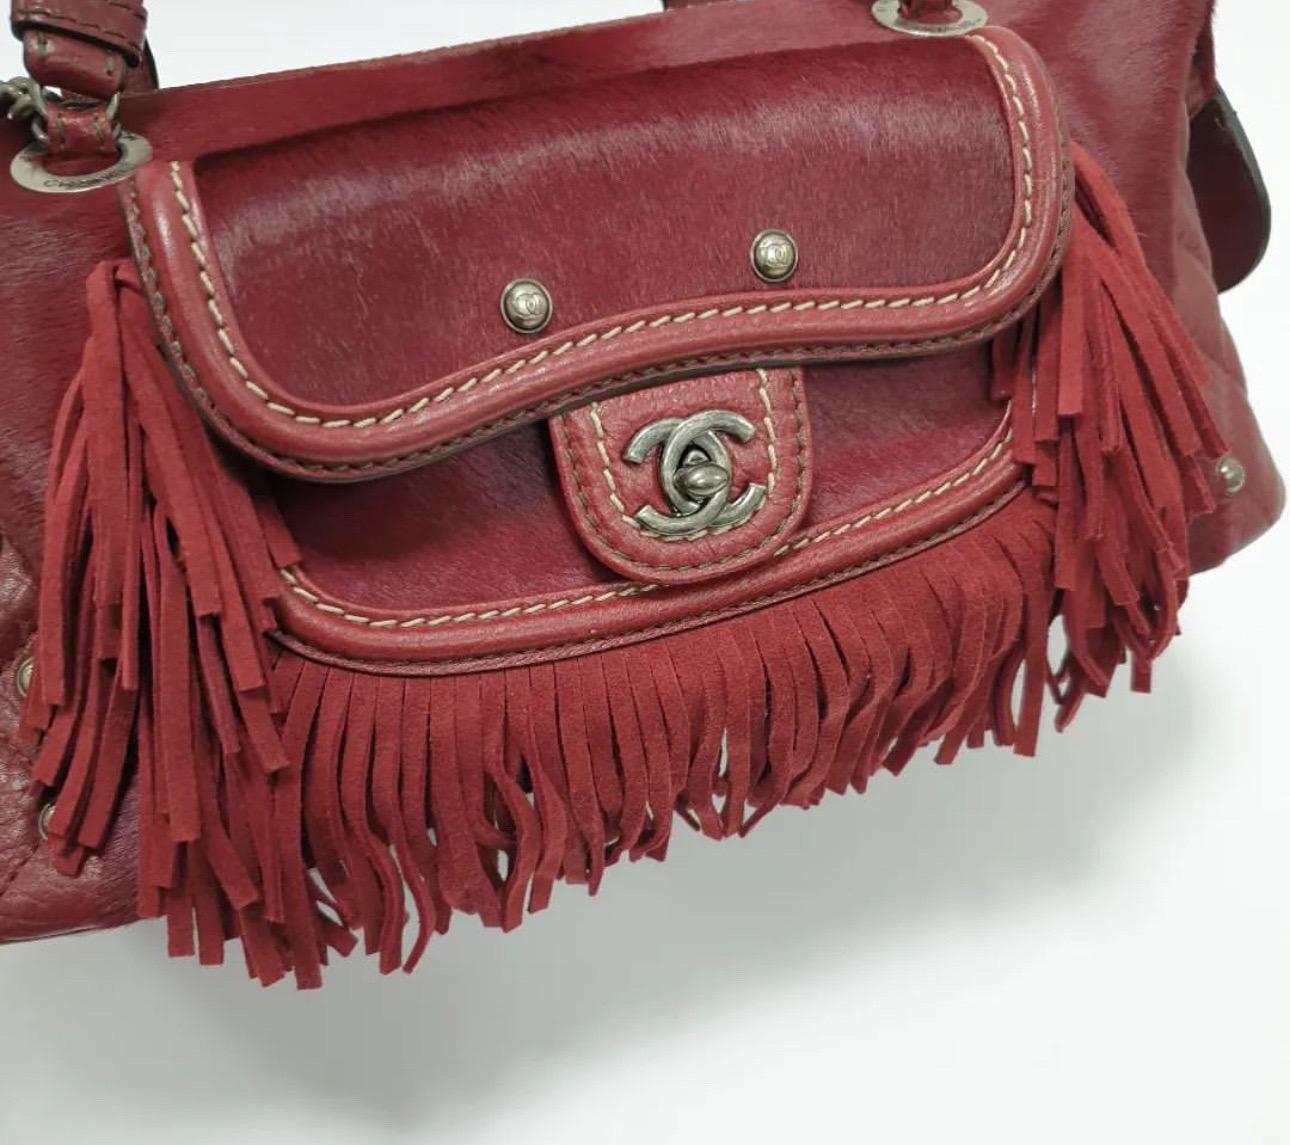 Chanel Burgundy Pony Hair and Leather Fringe Paris-Dallas Bowling Bag 1